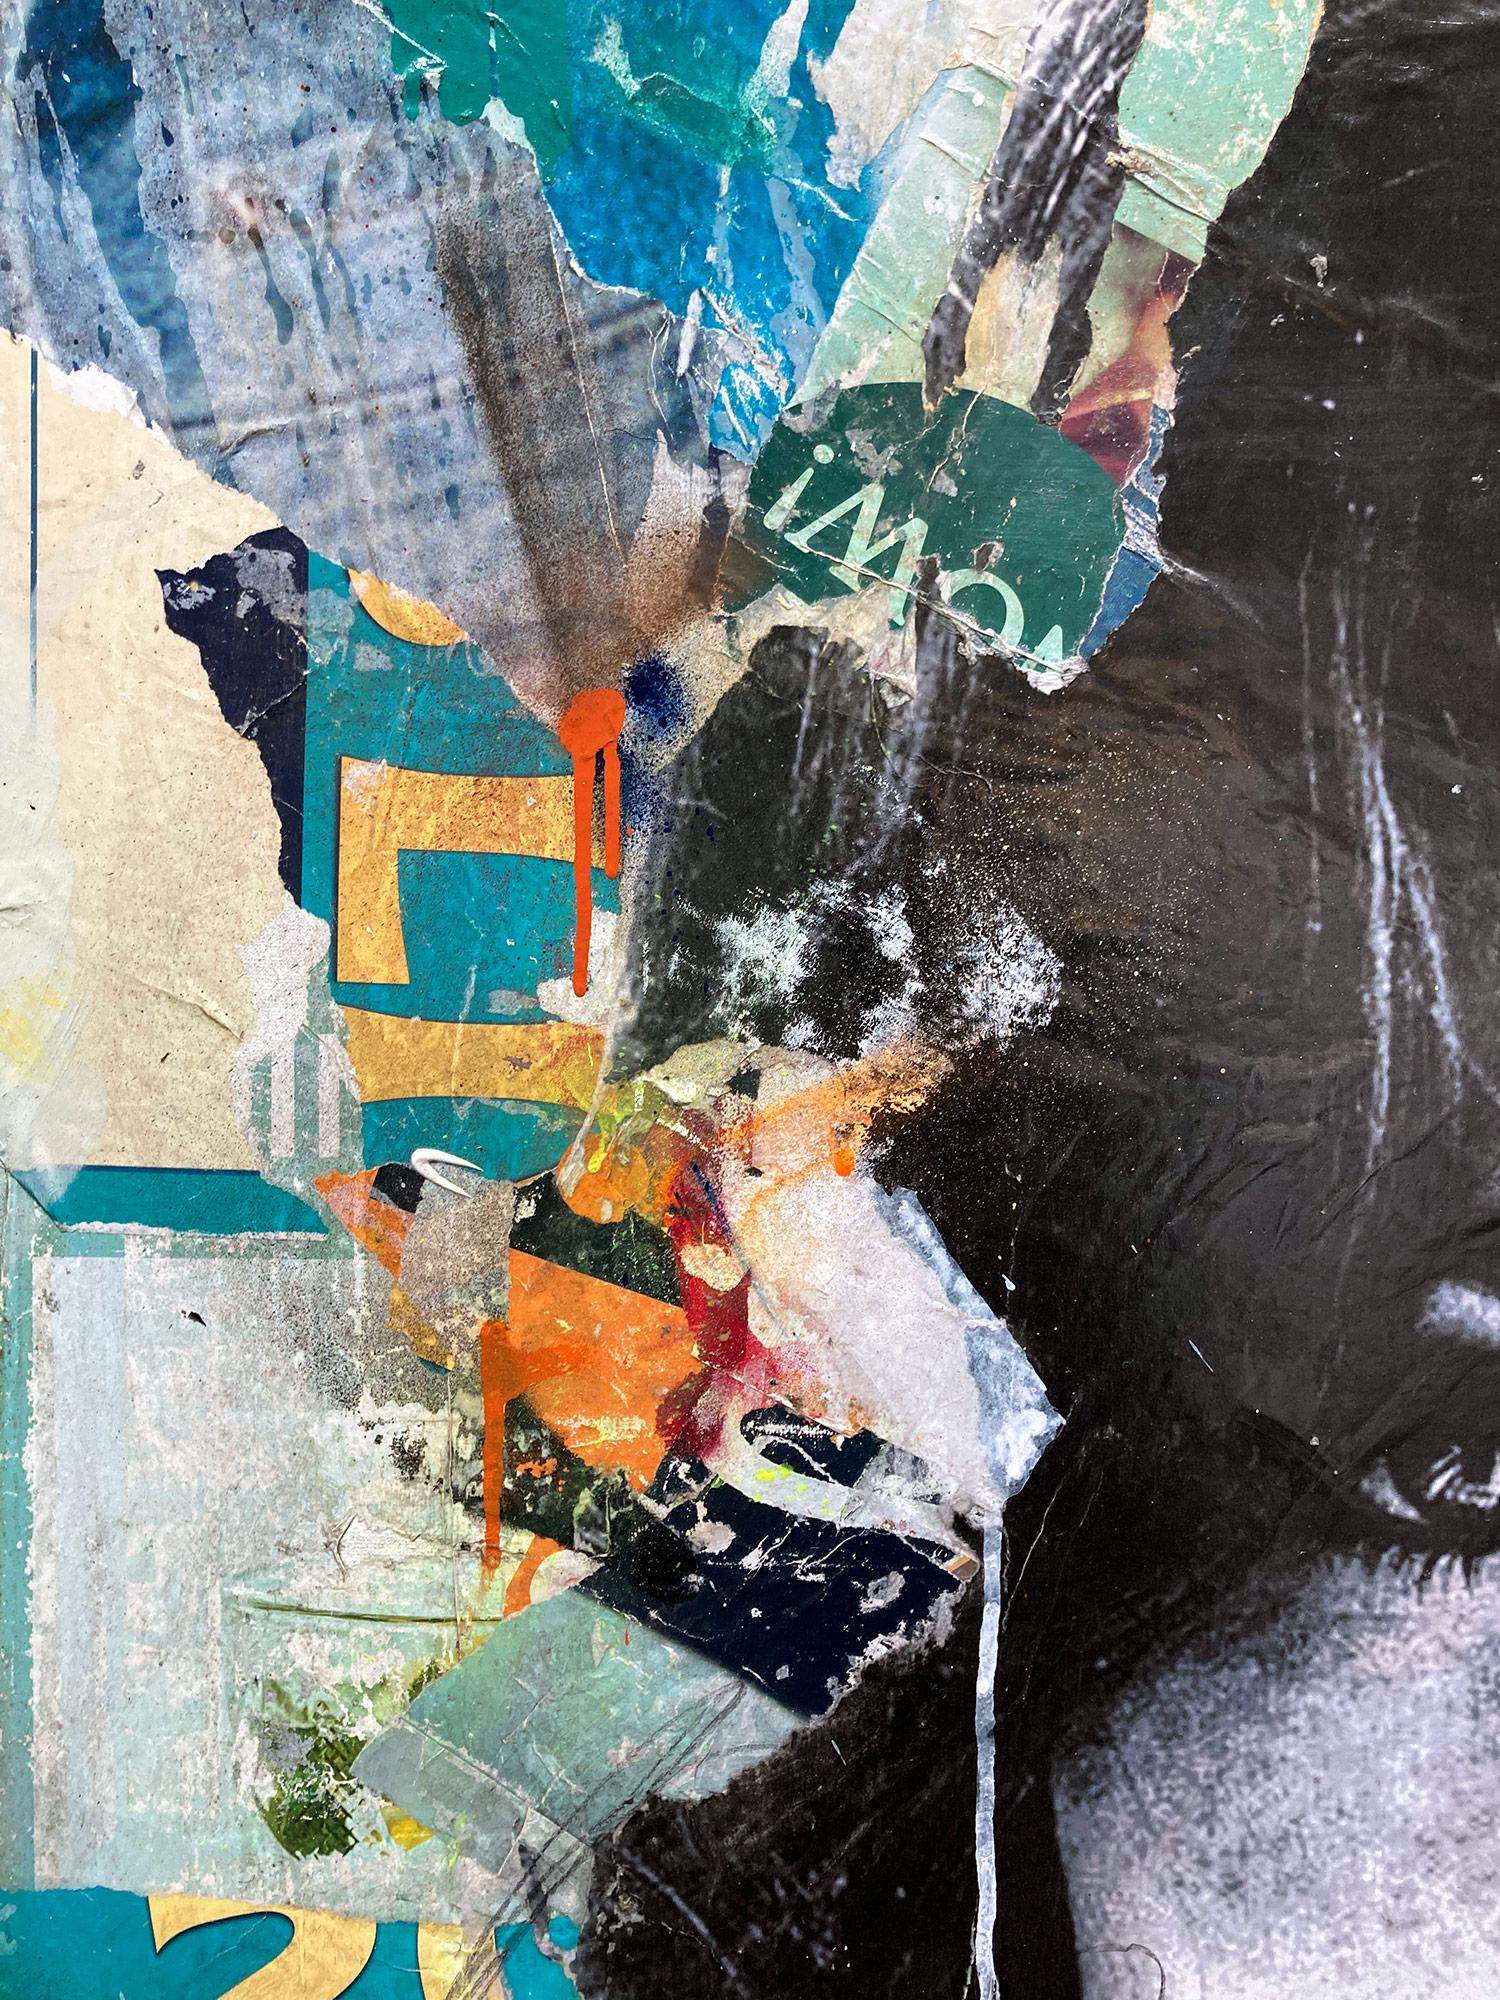 This piece depicts famous English actress Jacqueline Bisset. Done with beautiful expressive colors and a distinctive street art design, this piece pops with energy and romantic beauty. Its composition and bold collage make a wonderful statement and